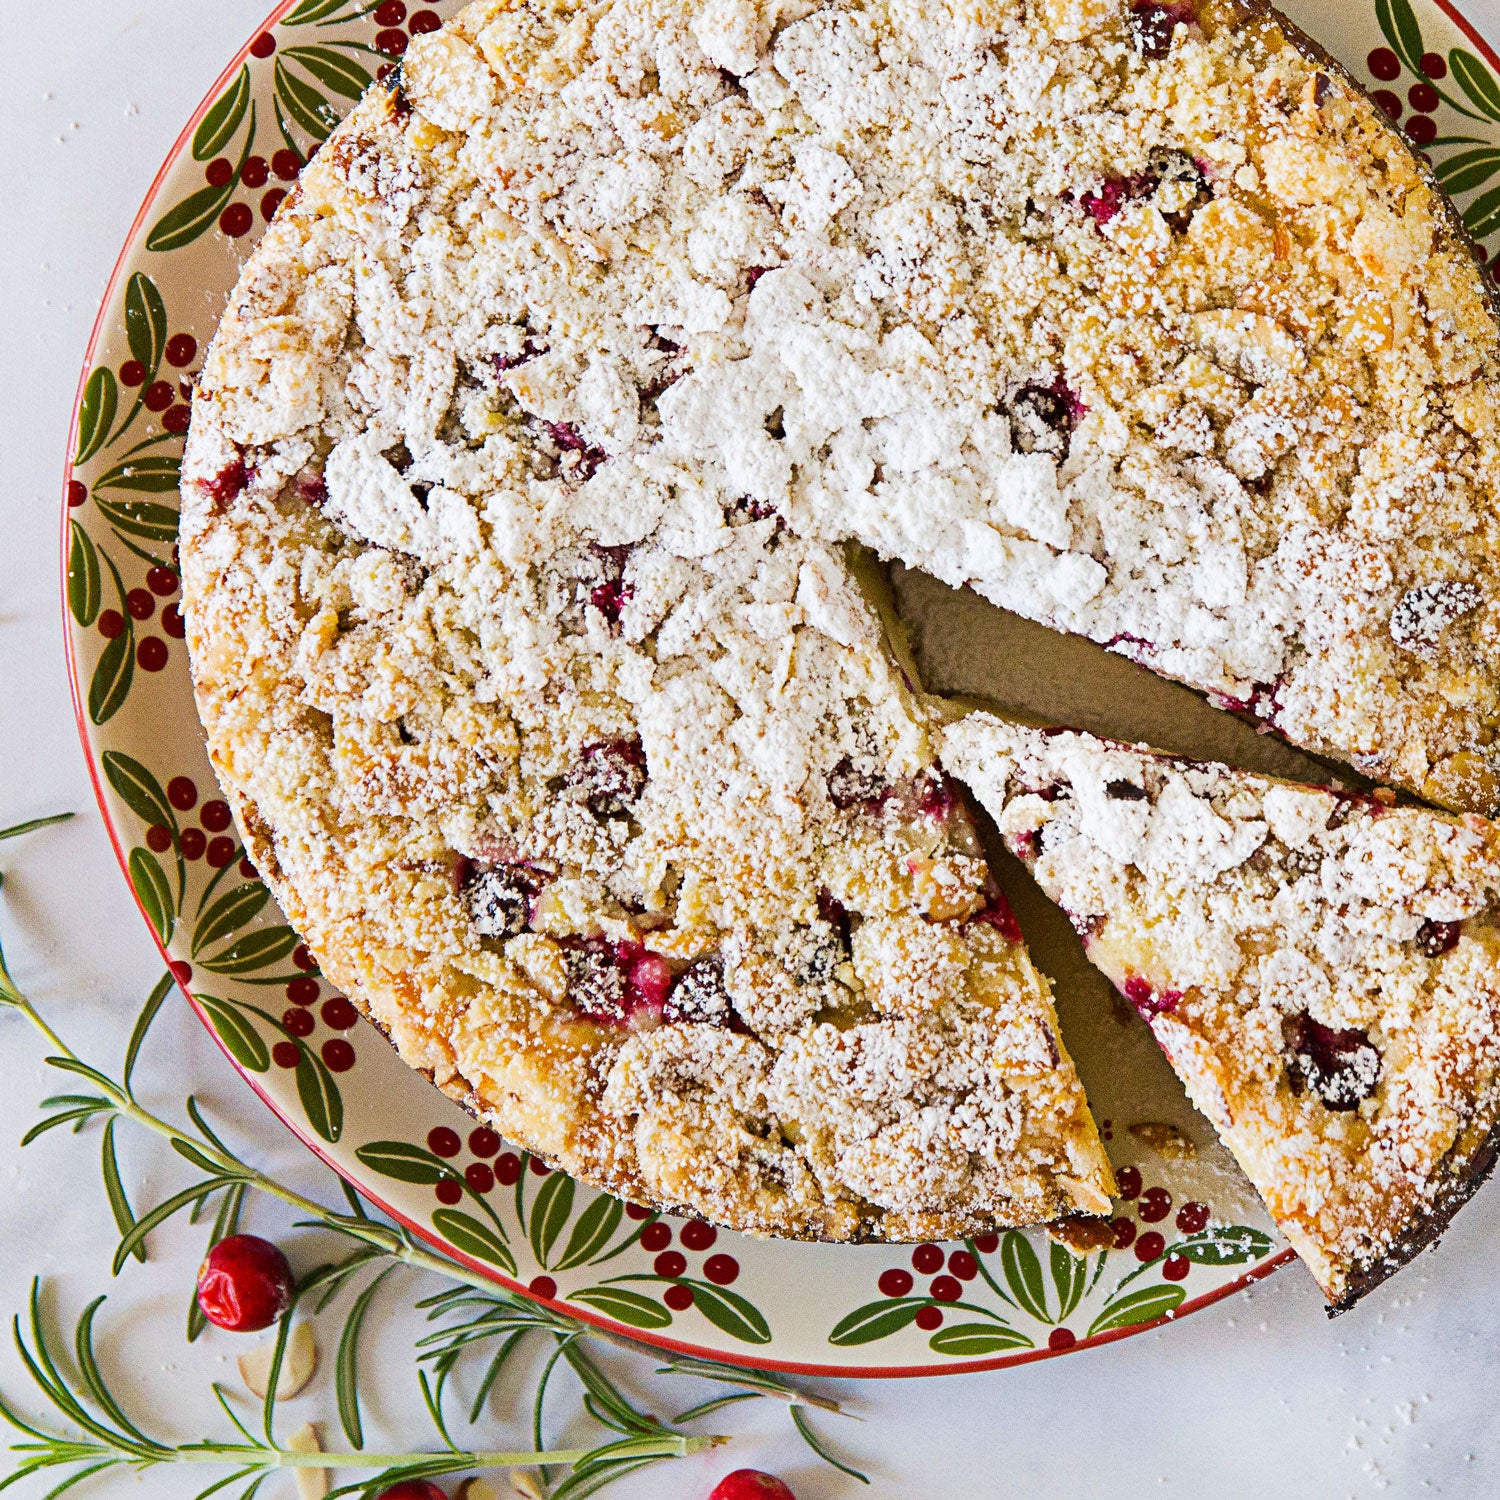 Cranberry Almond Cake with Crunchy Almond Topping